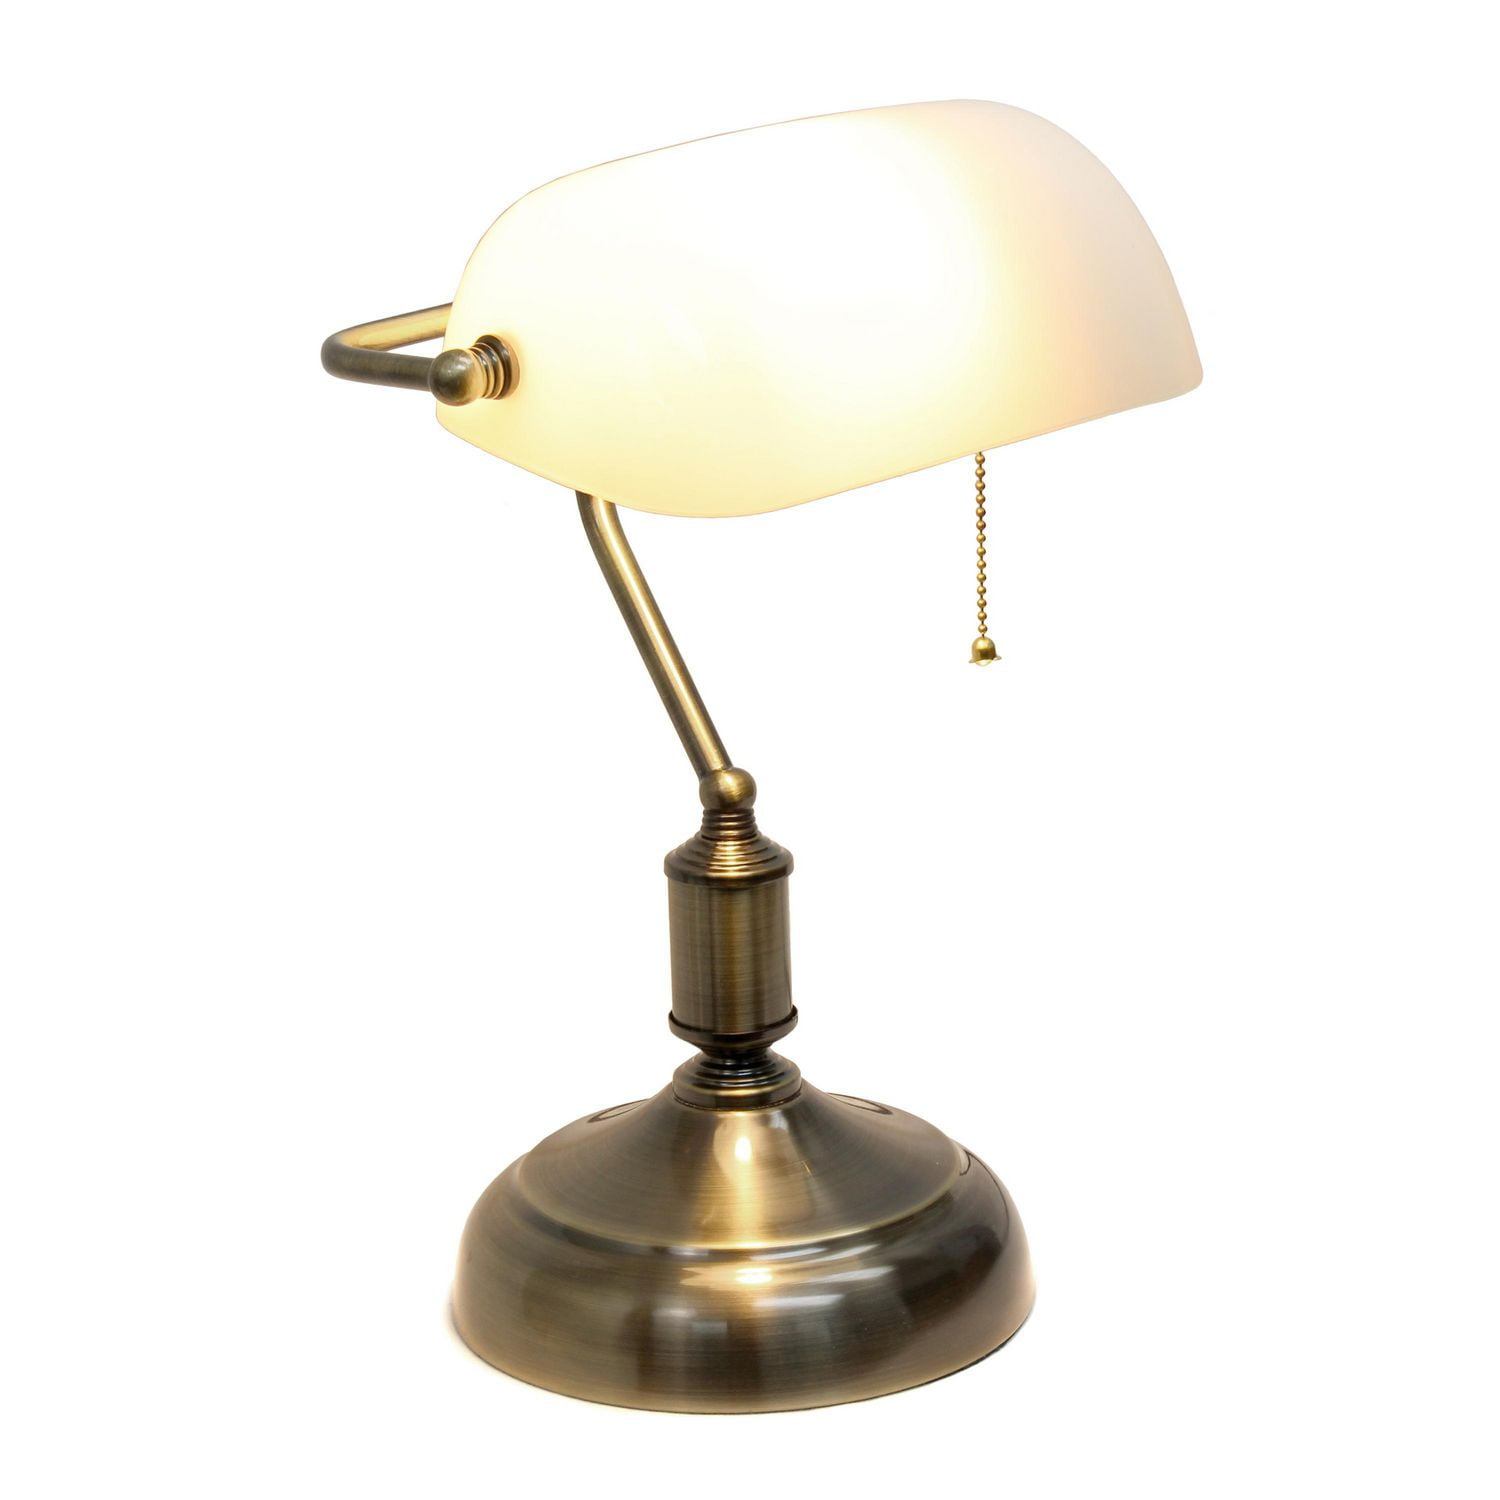 Simple Designs Executive Banker's Desk Lamp with Glass Shade 